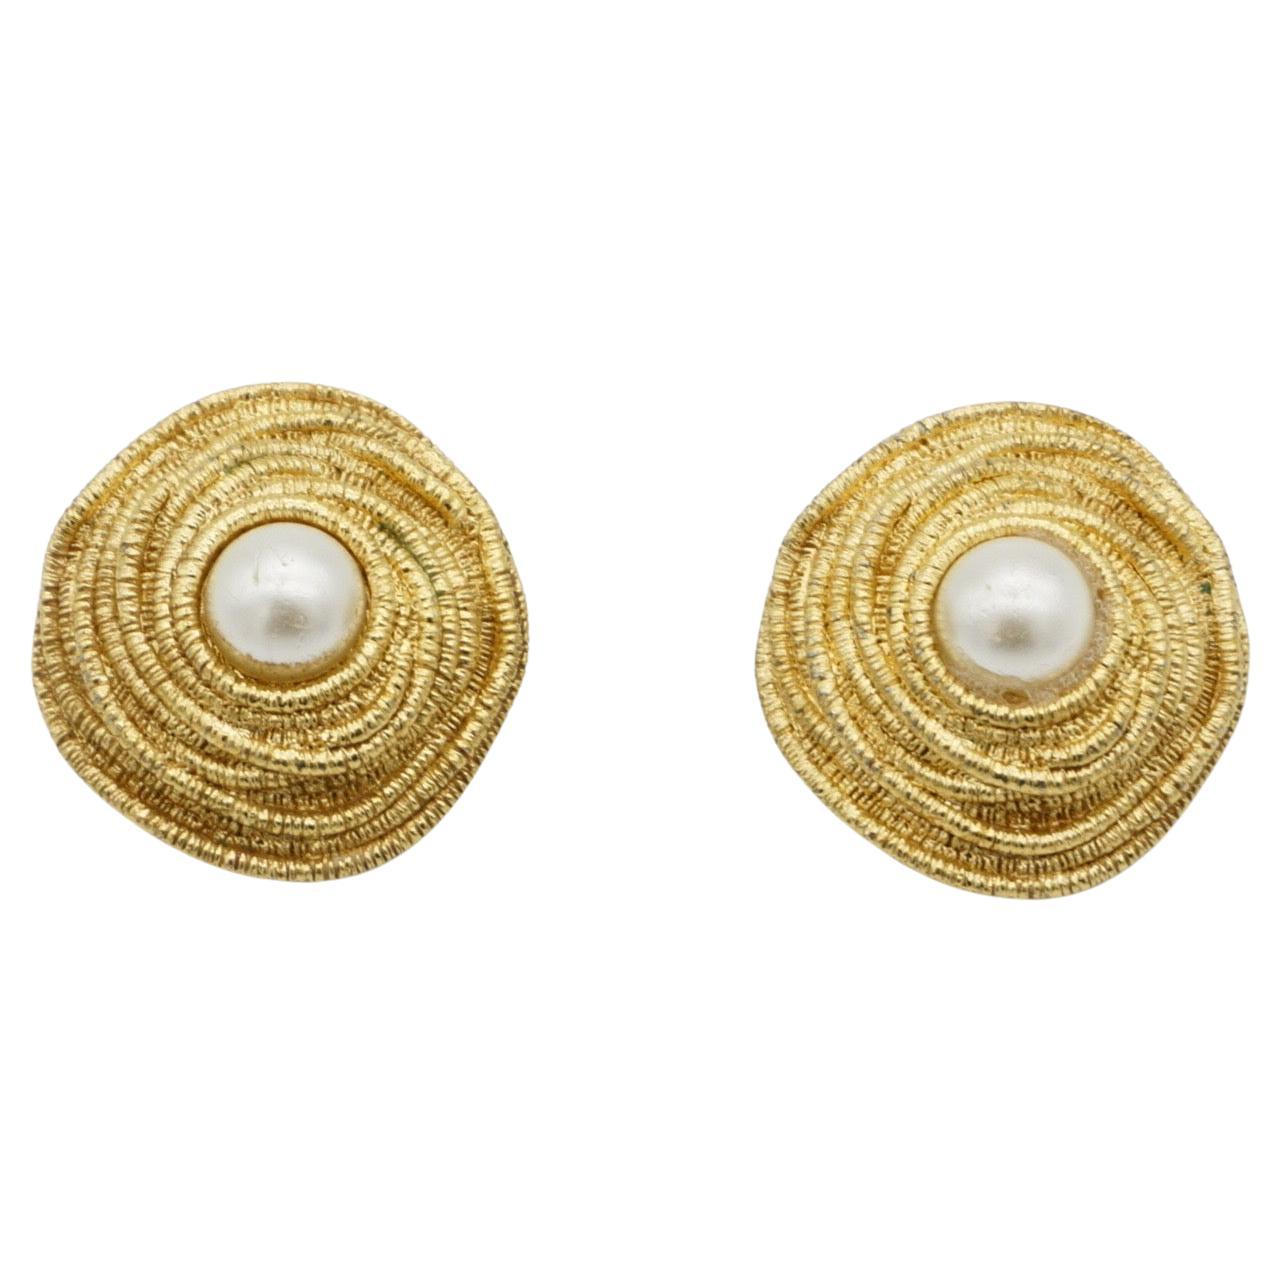 Christian Dior Vintage 1980s Irregular Spiral Round Circle Pearl Clip Earrings For Sale